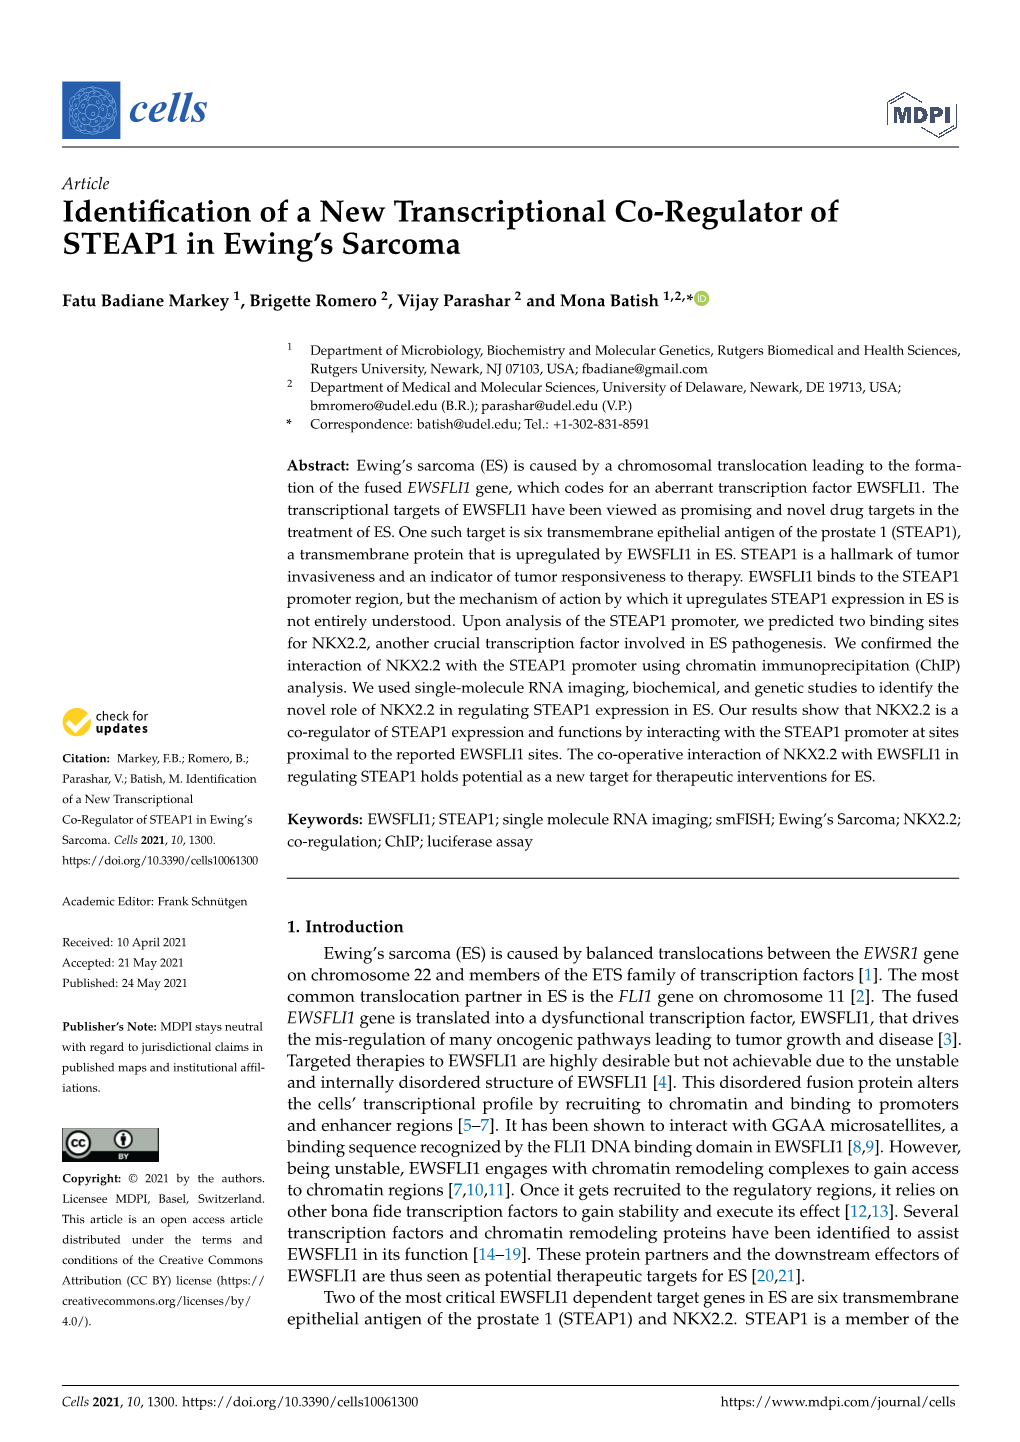 Identification of a New Transcriptional Co-Regulator of STEAP1 in Ewing's